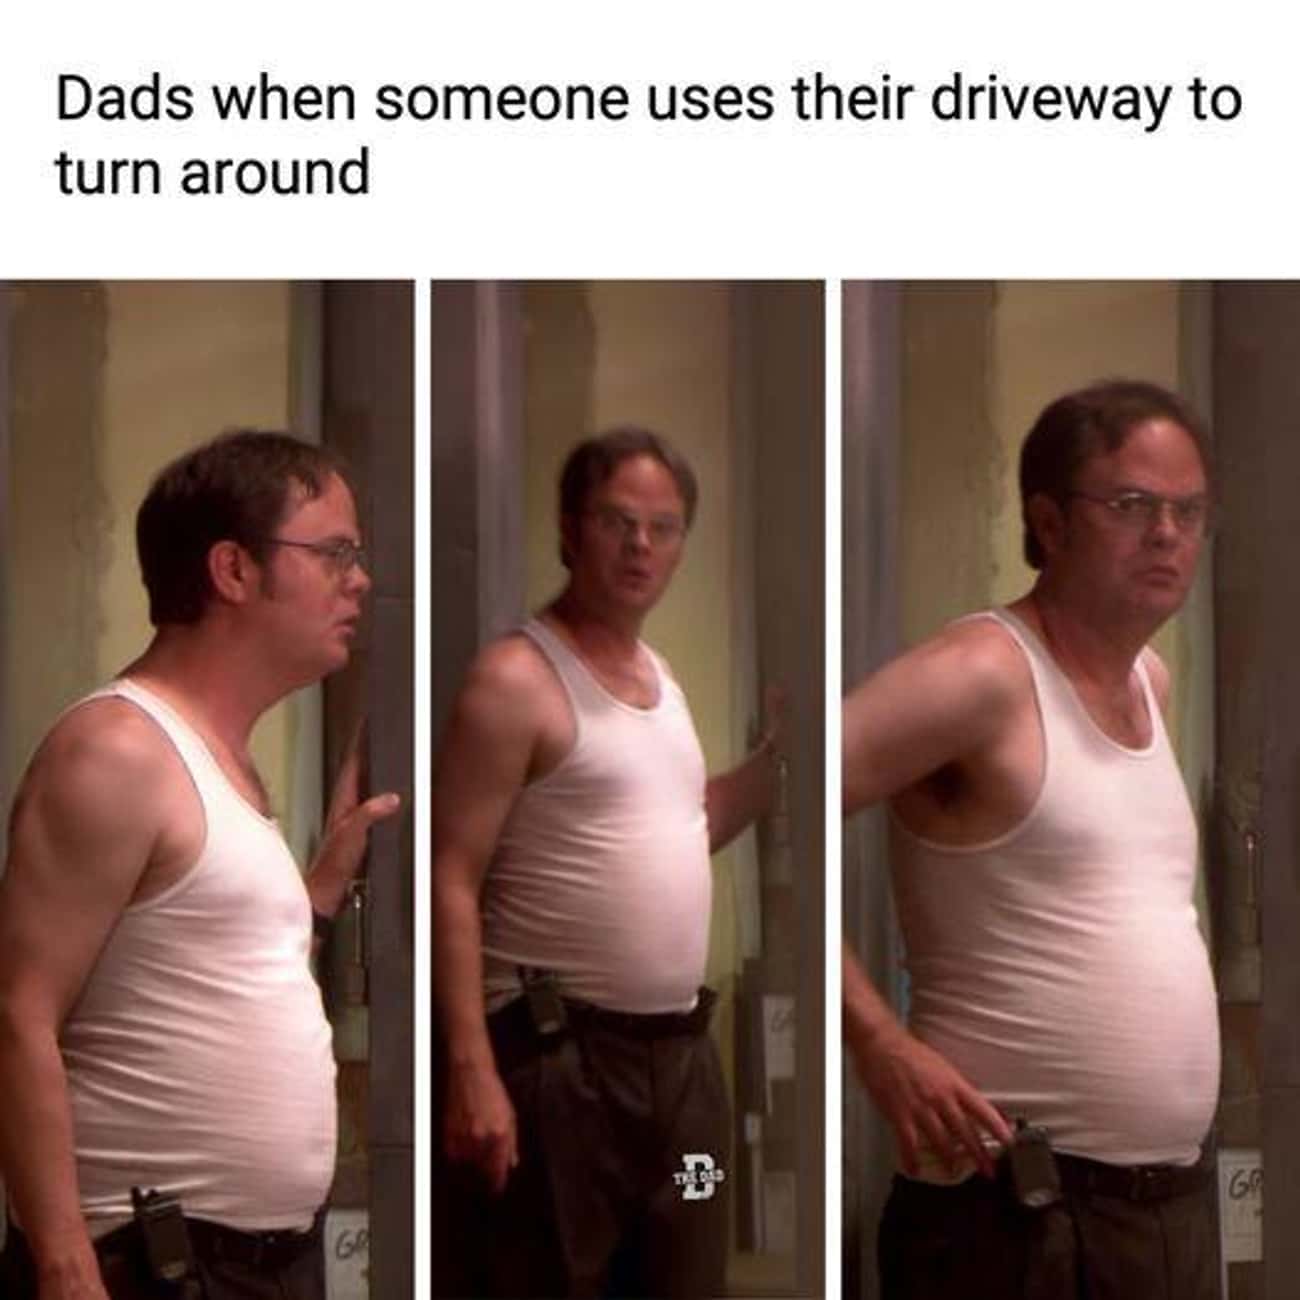 Classic Dad Stance